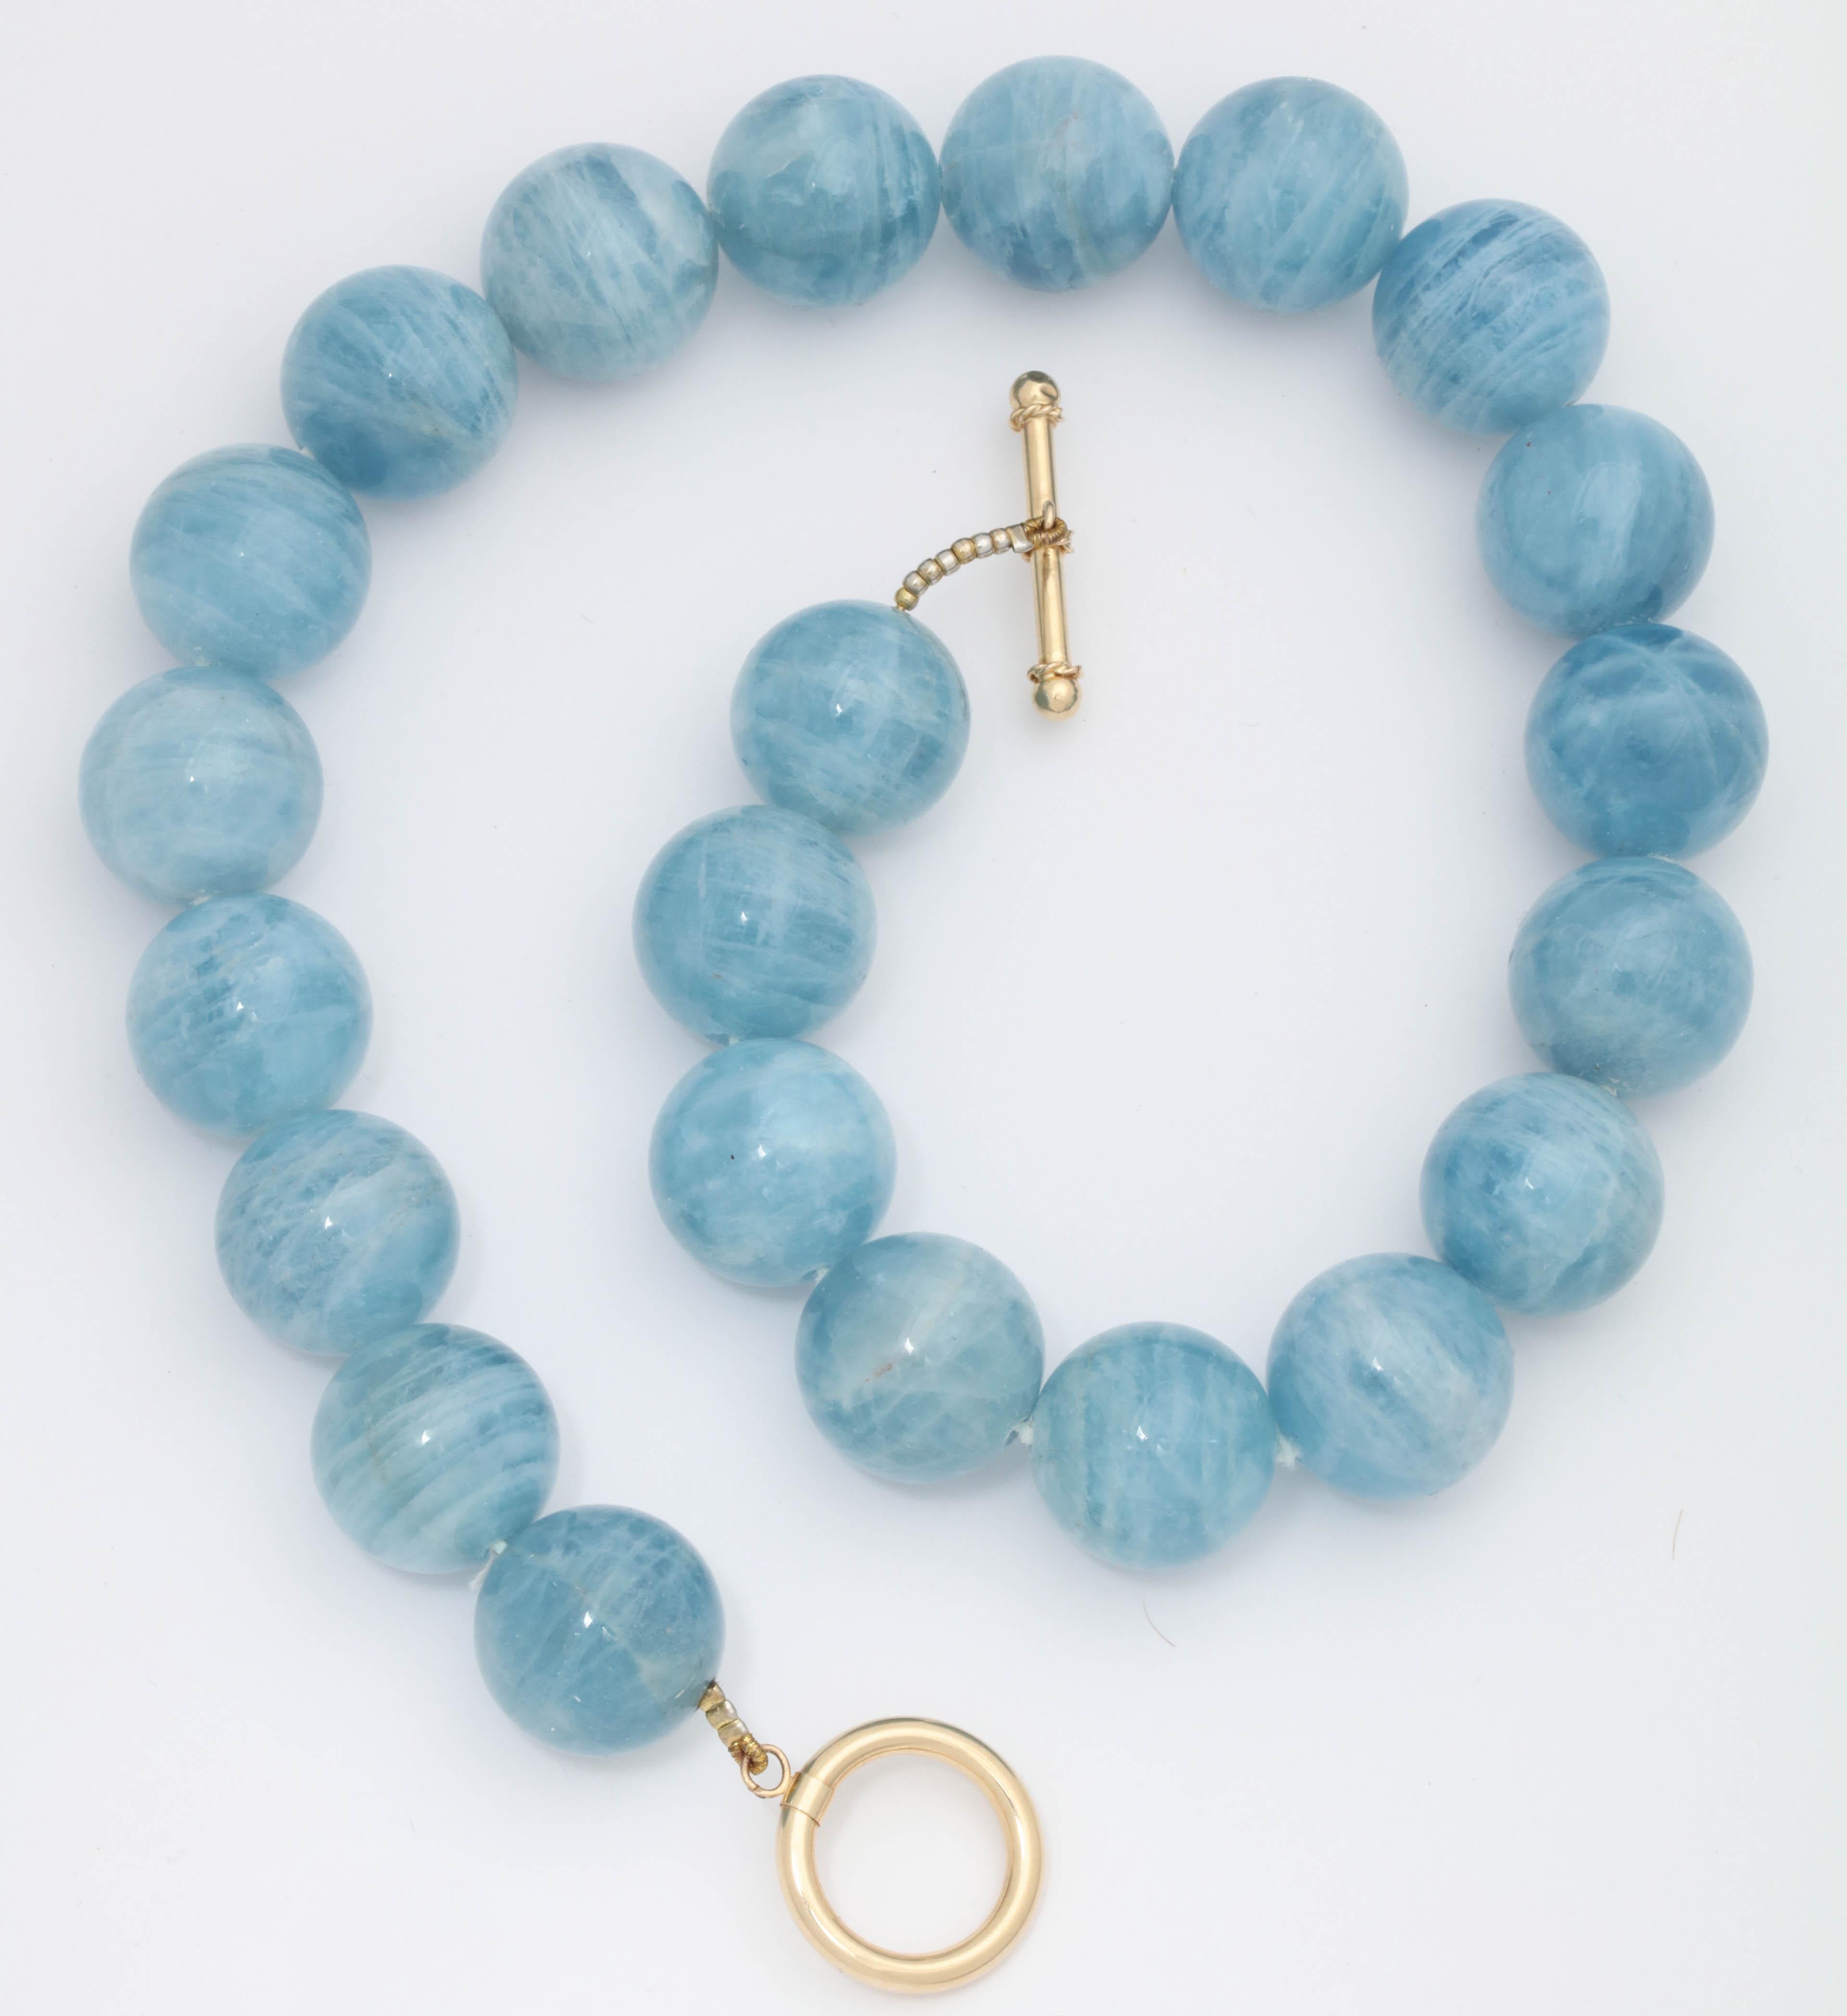  Large Aquamarine Gumball Gold Necklace with Toggle Clasp 1